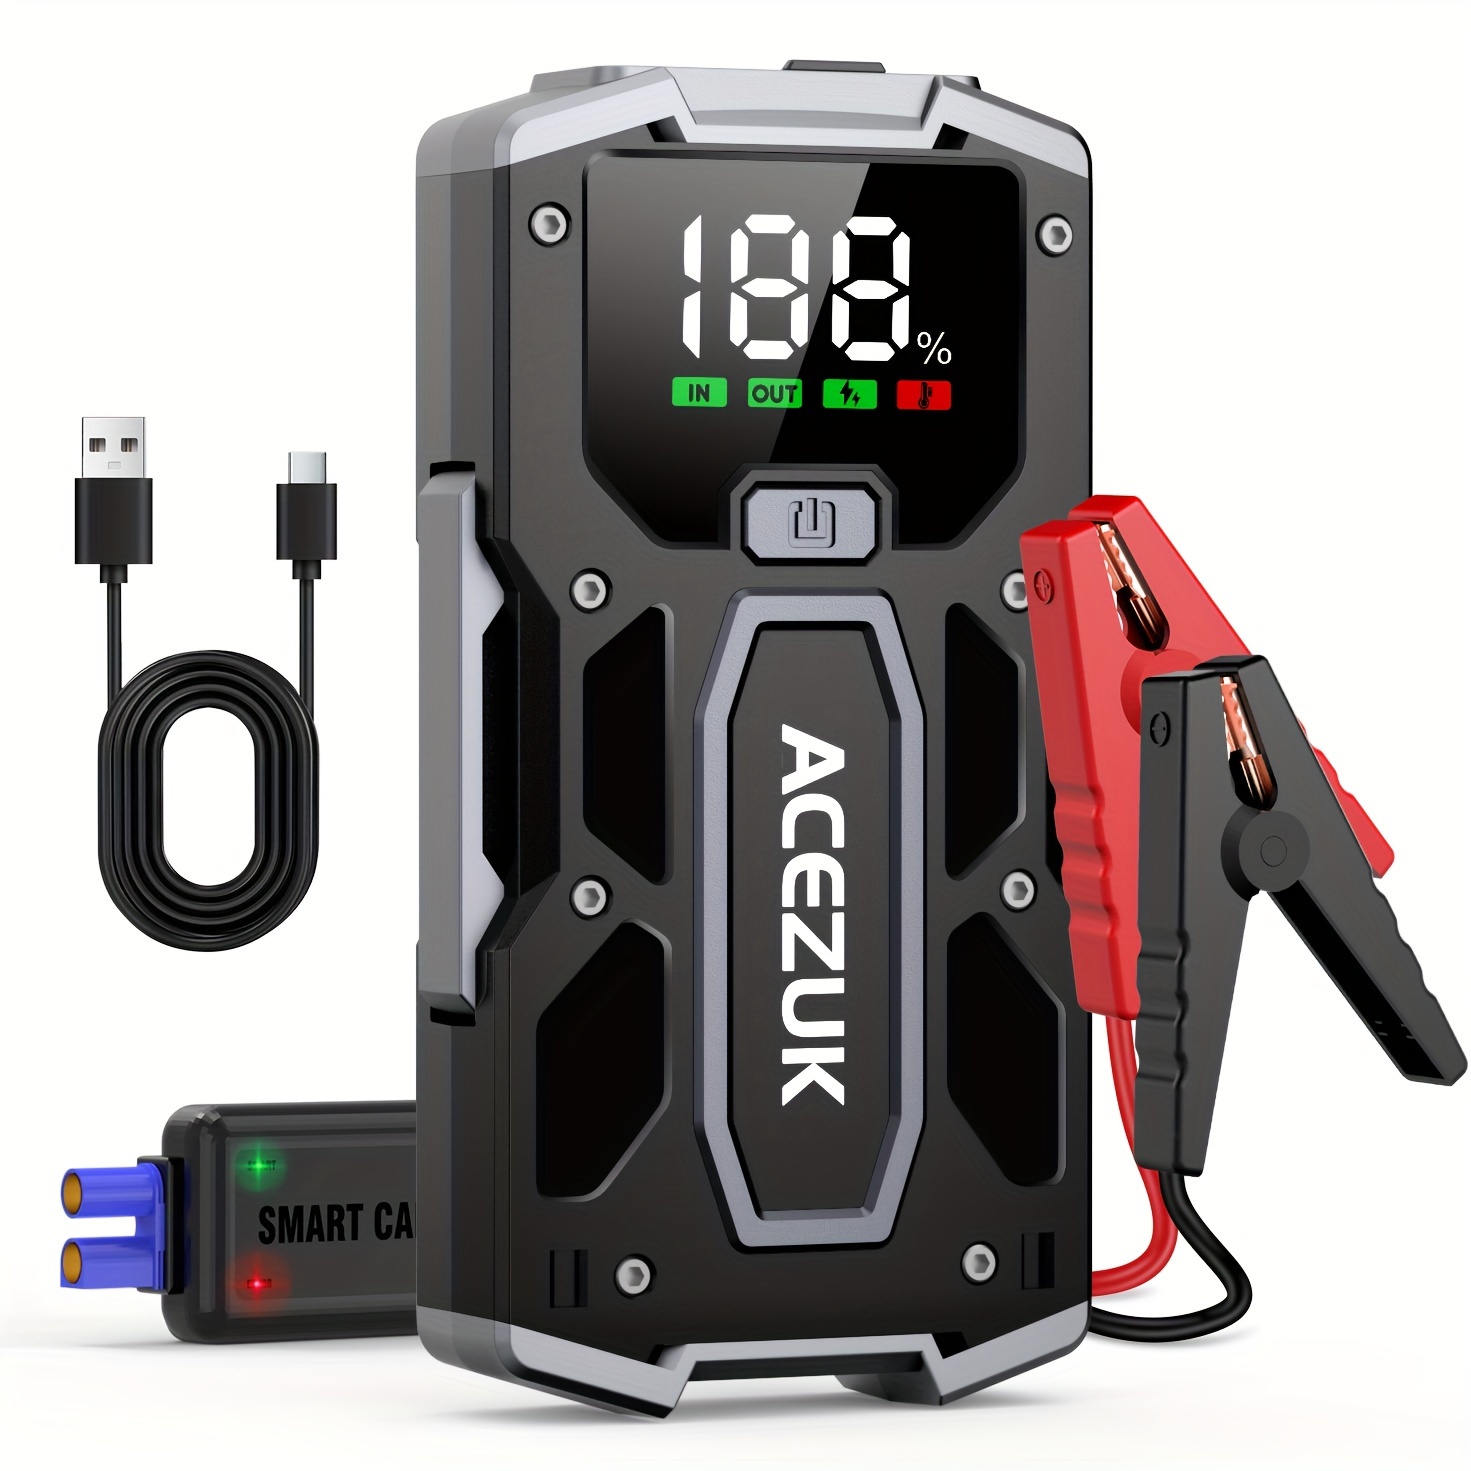 

Acezuk Car Jump Starter, 3000a 12v 8-in-1 Pack, Up To 7.0l Gas & 5.5l Engines Quick Charge 3.0 Power Bank Jumper Cable With Led, Large Screen